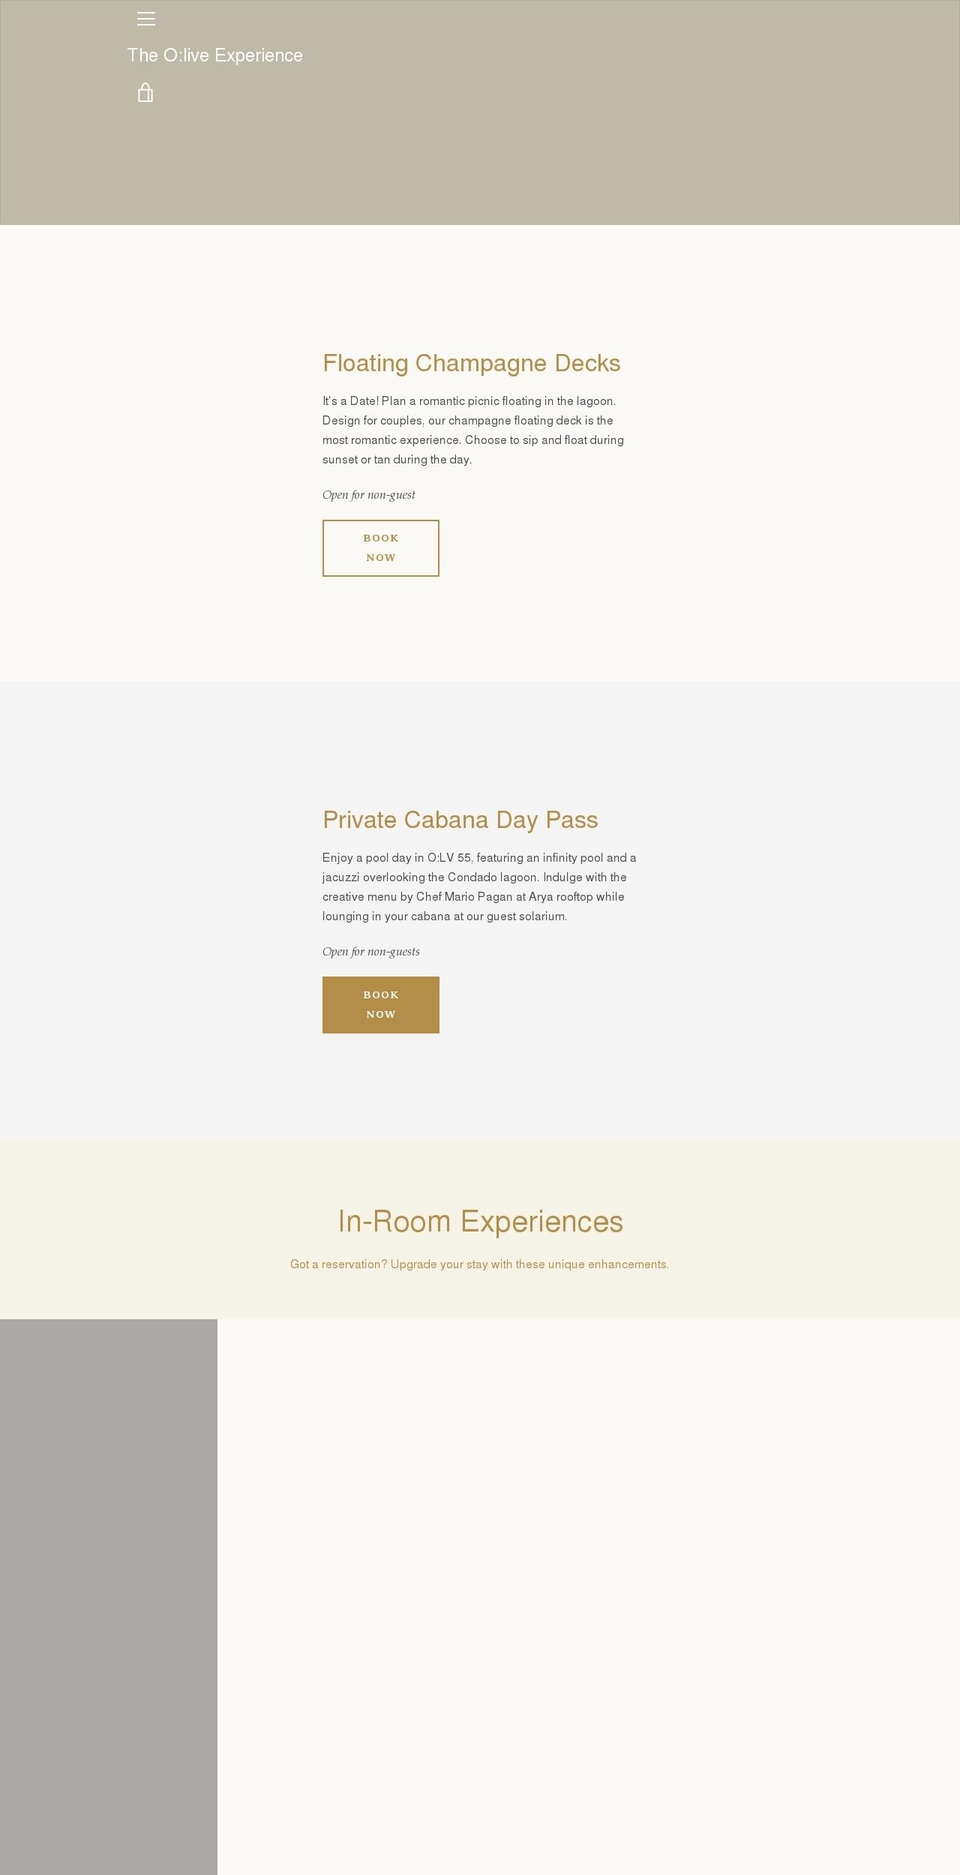 Copy of Narrative Shopify theme site example theolivexperience.com